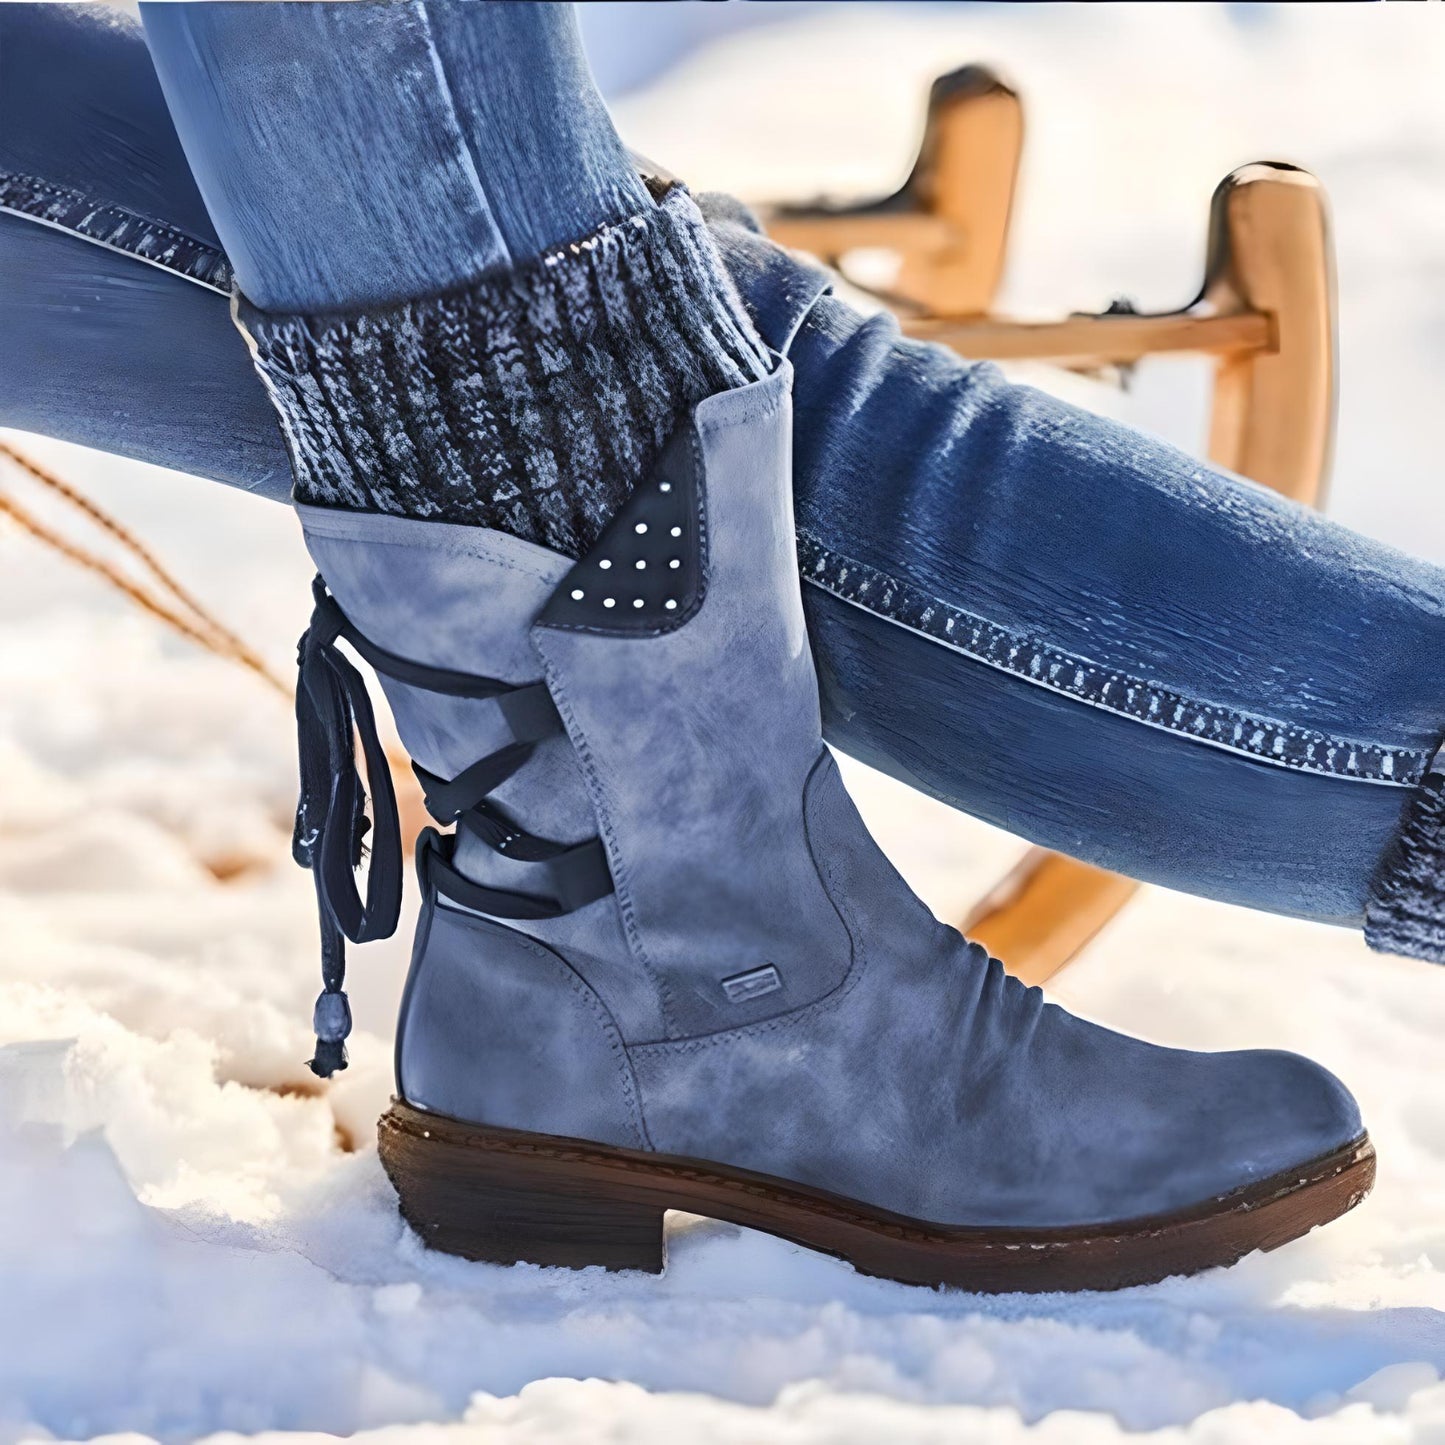 Wallace | Warm Lace Up Snow Boots